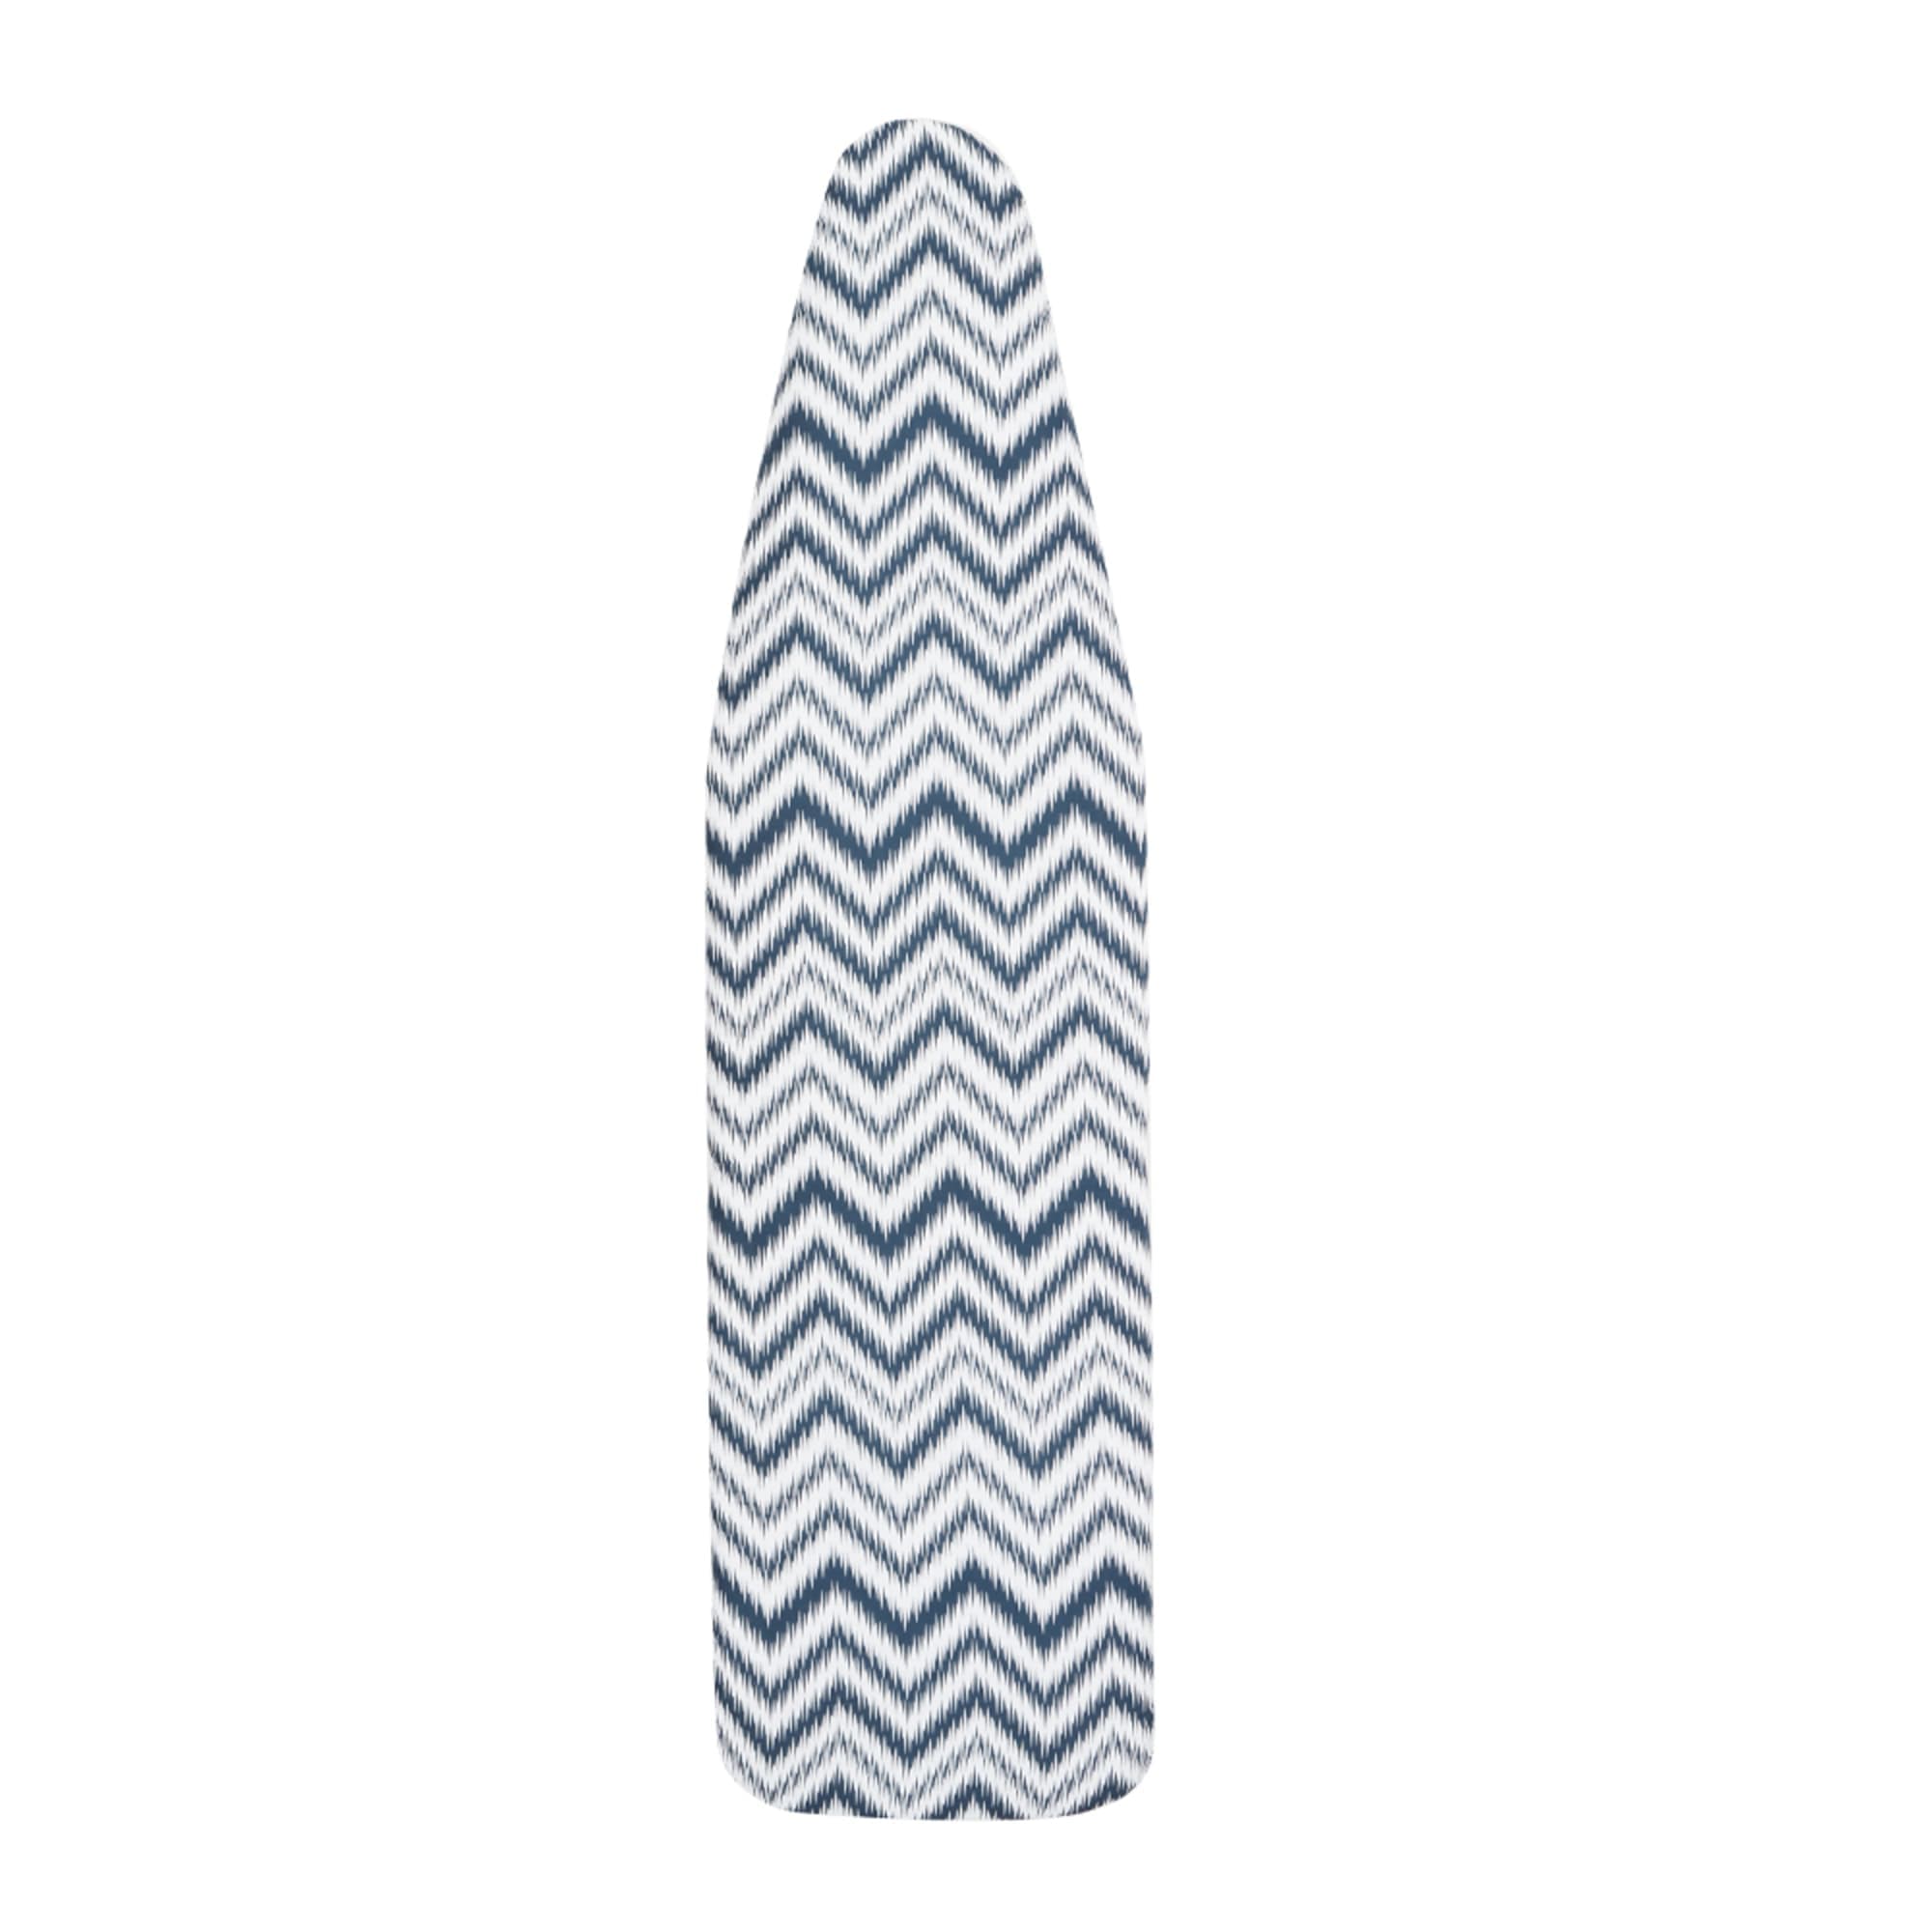 Seymour Home Products Ultimate Replacement Cover and Pad, Blue Chevron, Fits 53"-54" X 13"-14" $10.00 EACH, CASE PACK OF 6